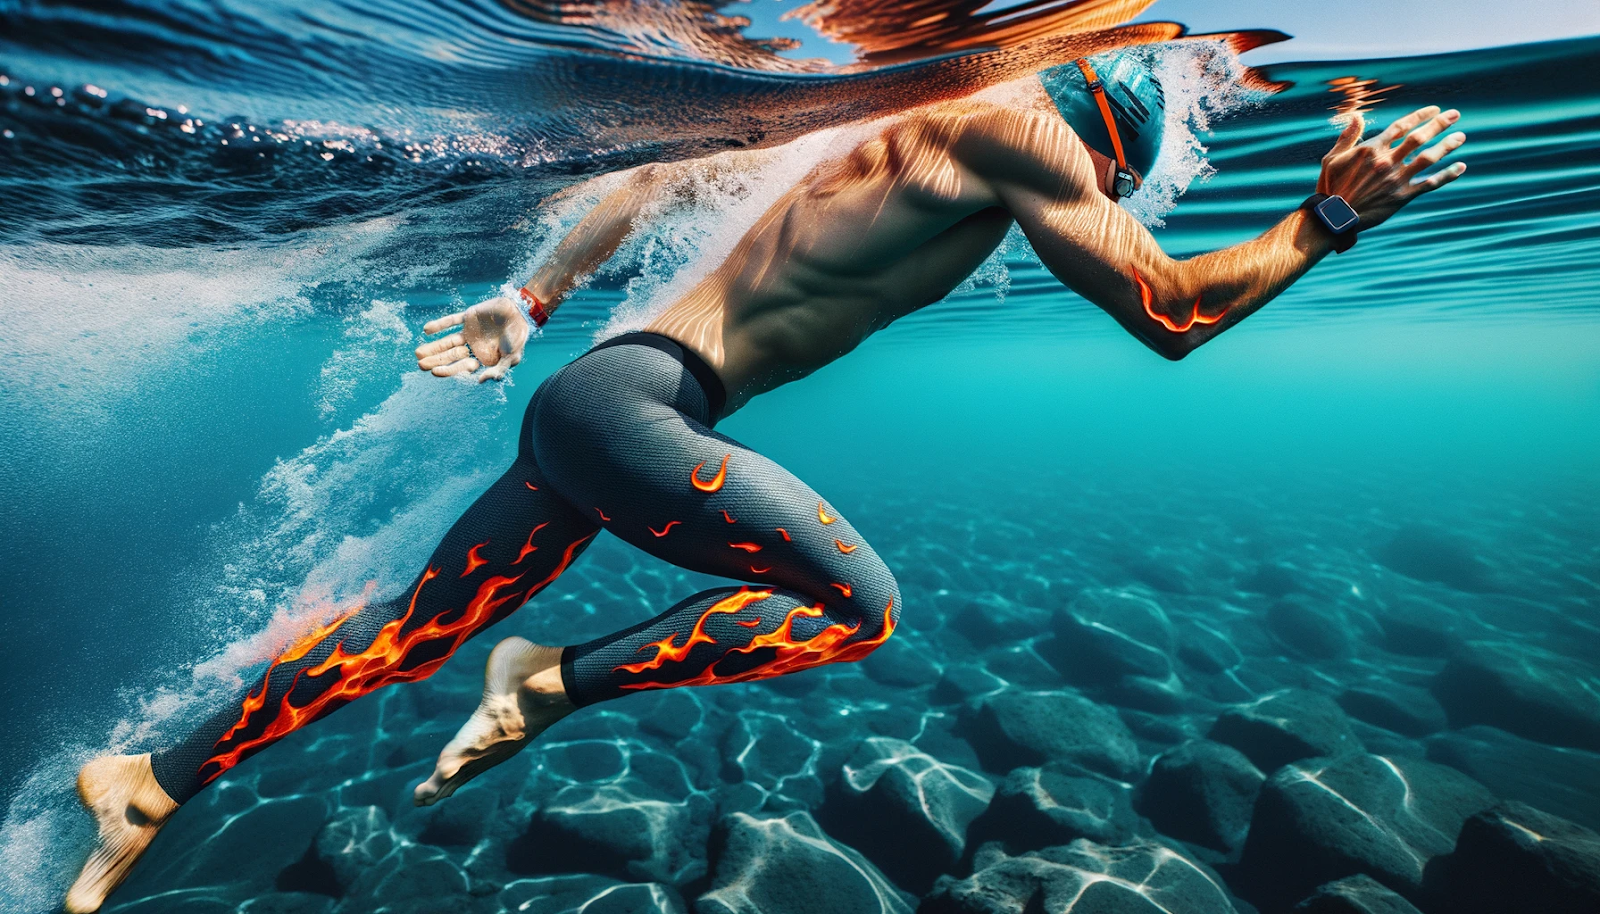 Photo of a determined triathlete swimming in clear blue water, wearing lava pants that fit snugly around their legs. The water ripples around them, and their arms are mid-stroke, emphasizing the power and technique of their swim.